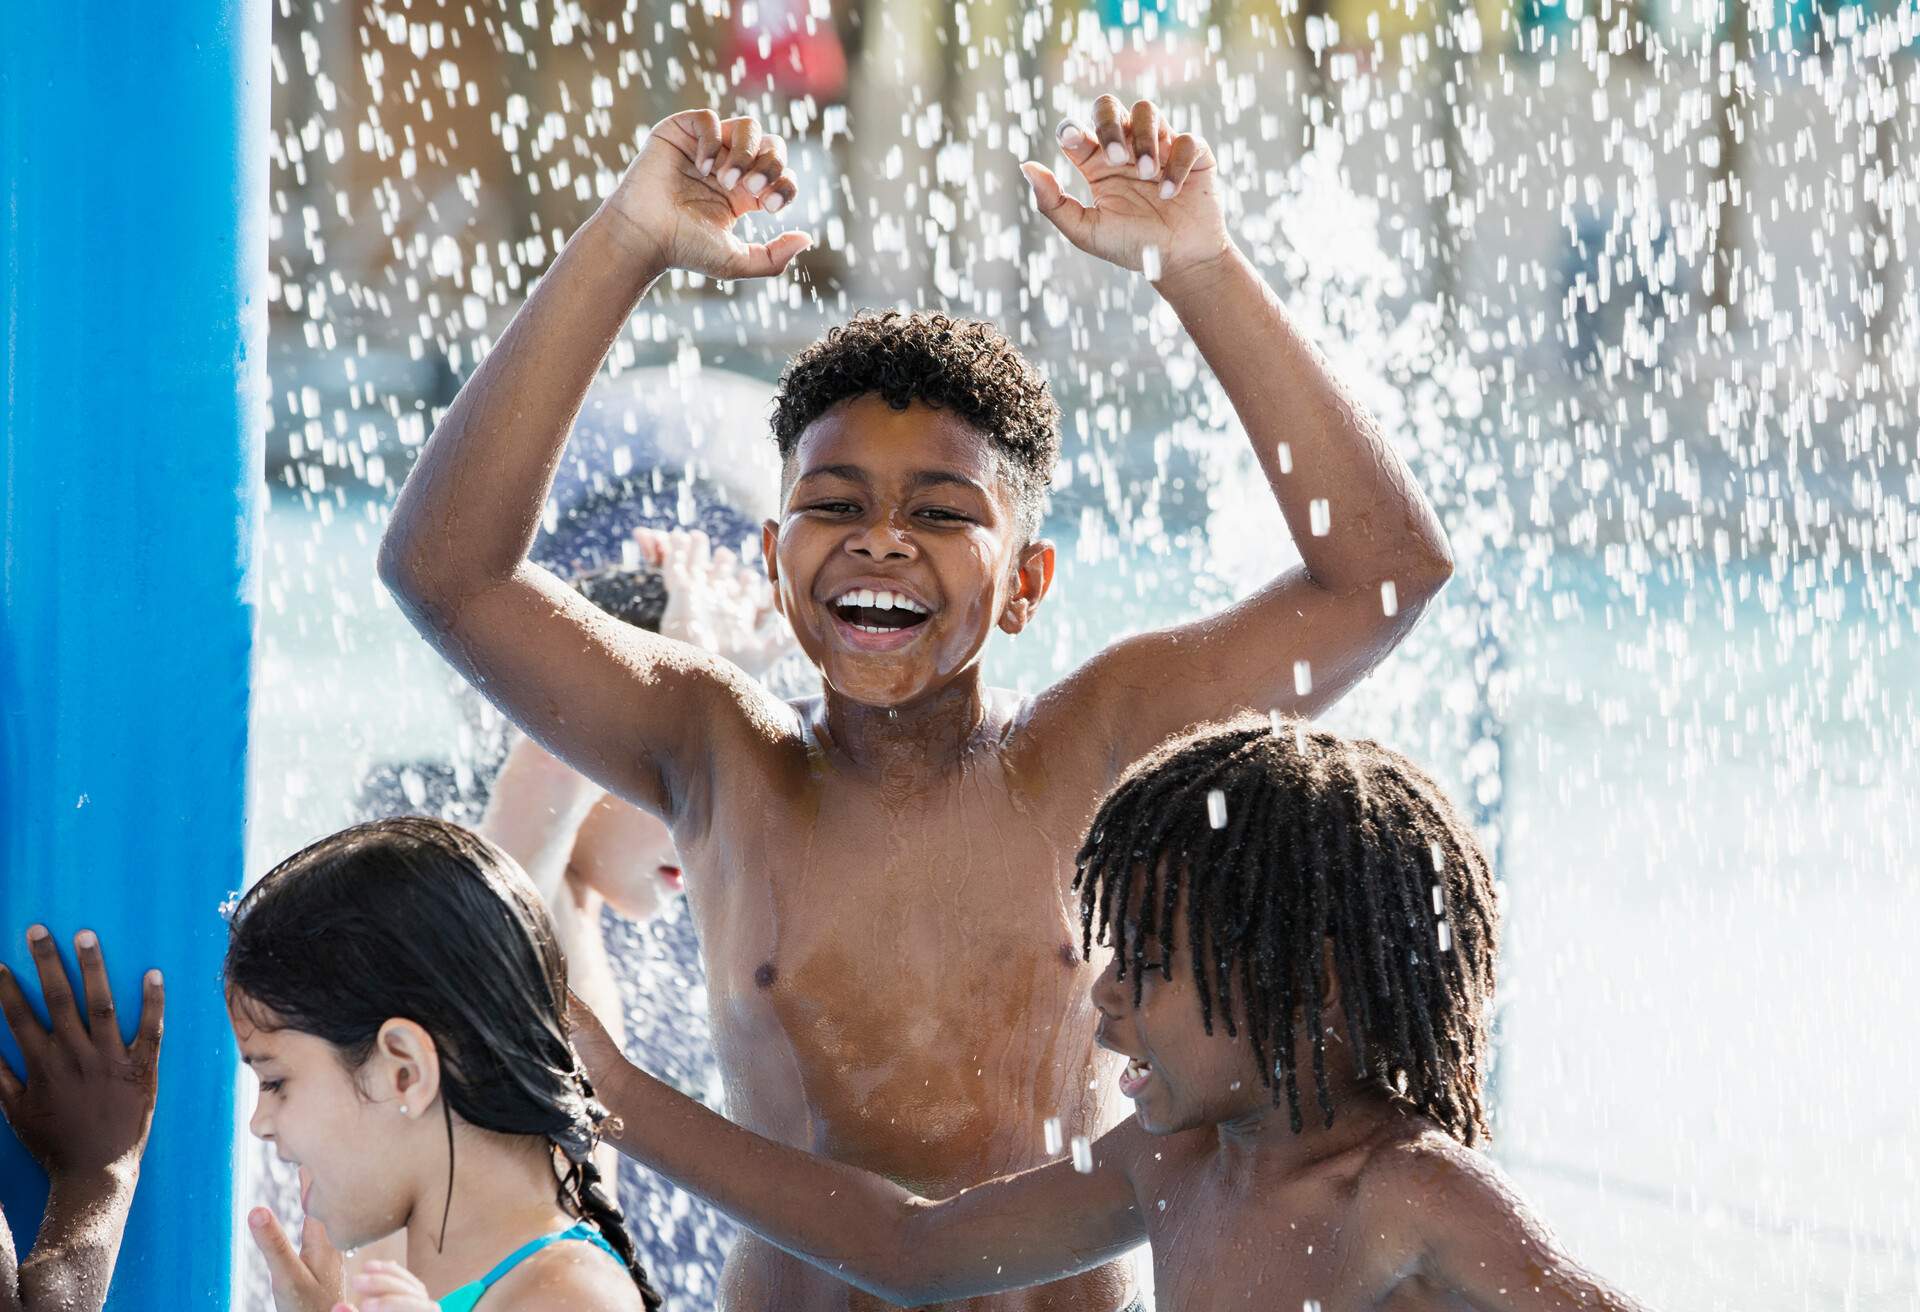 A 10 year old African-American boy having fun playing at a water park. He is standing under splashing water with a group of friends, arms raised, laughing and looking at the camera.